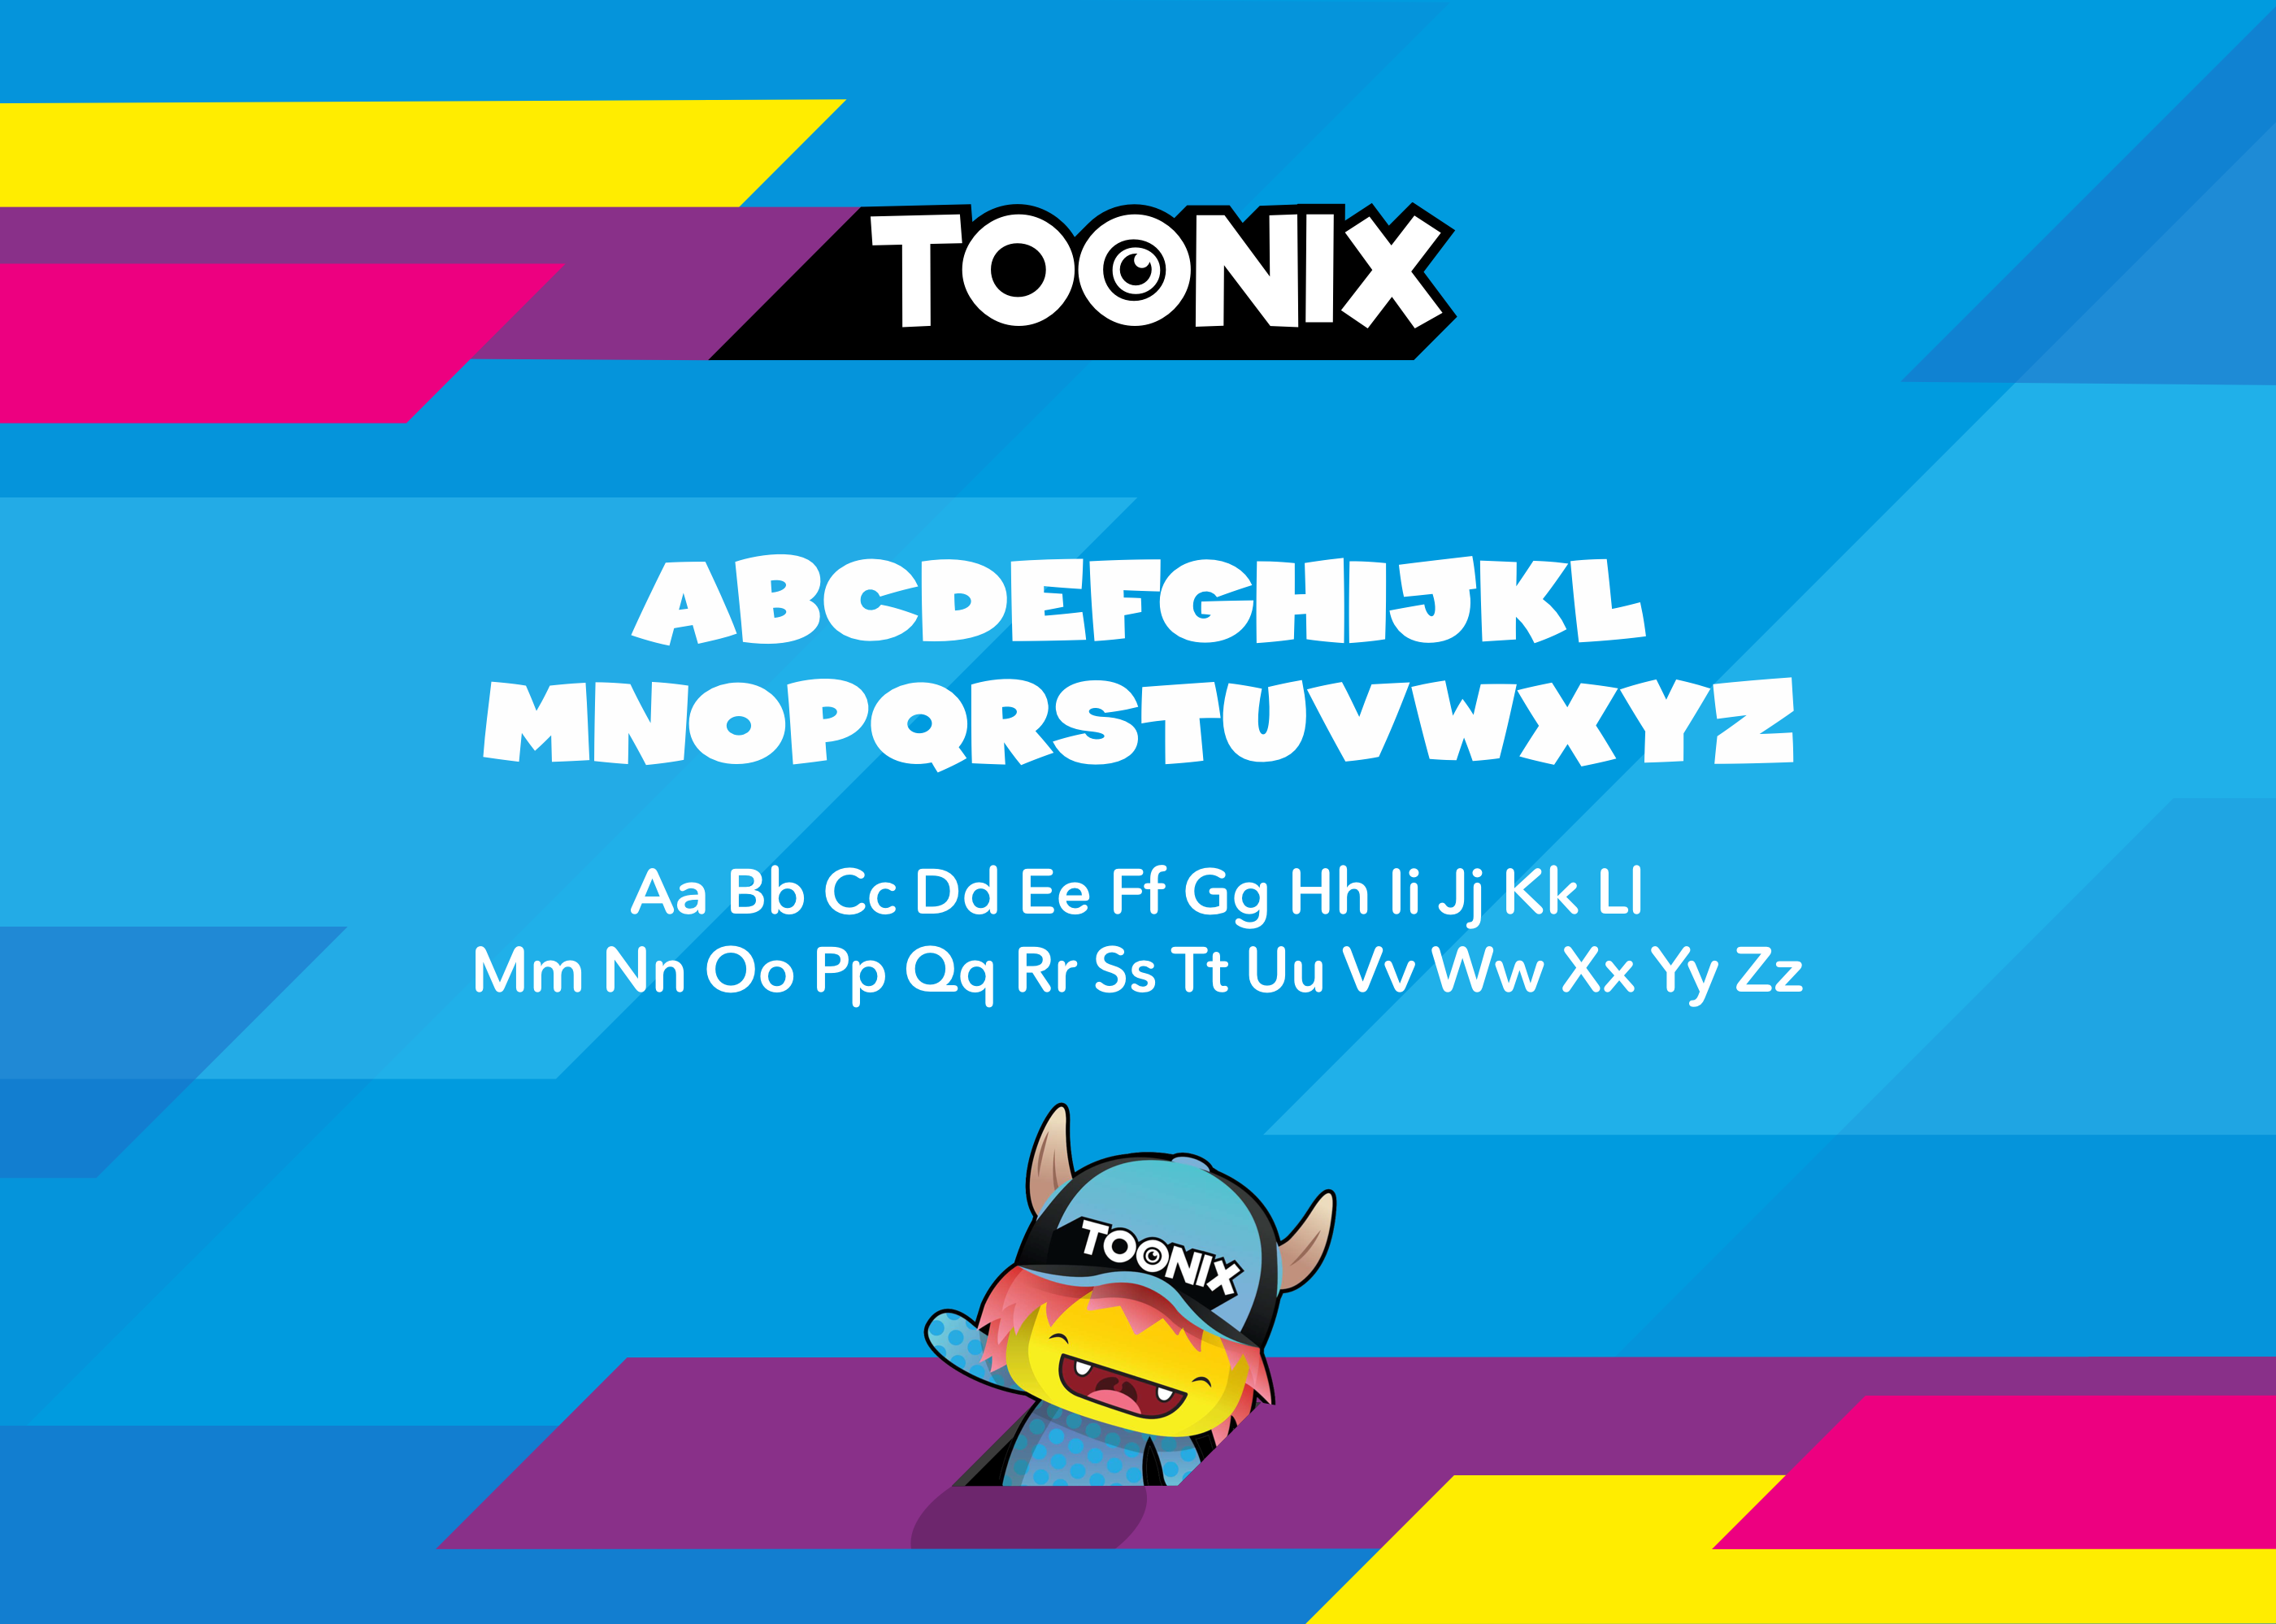 Toonix logo, fonts, colours and shards.